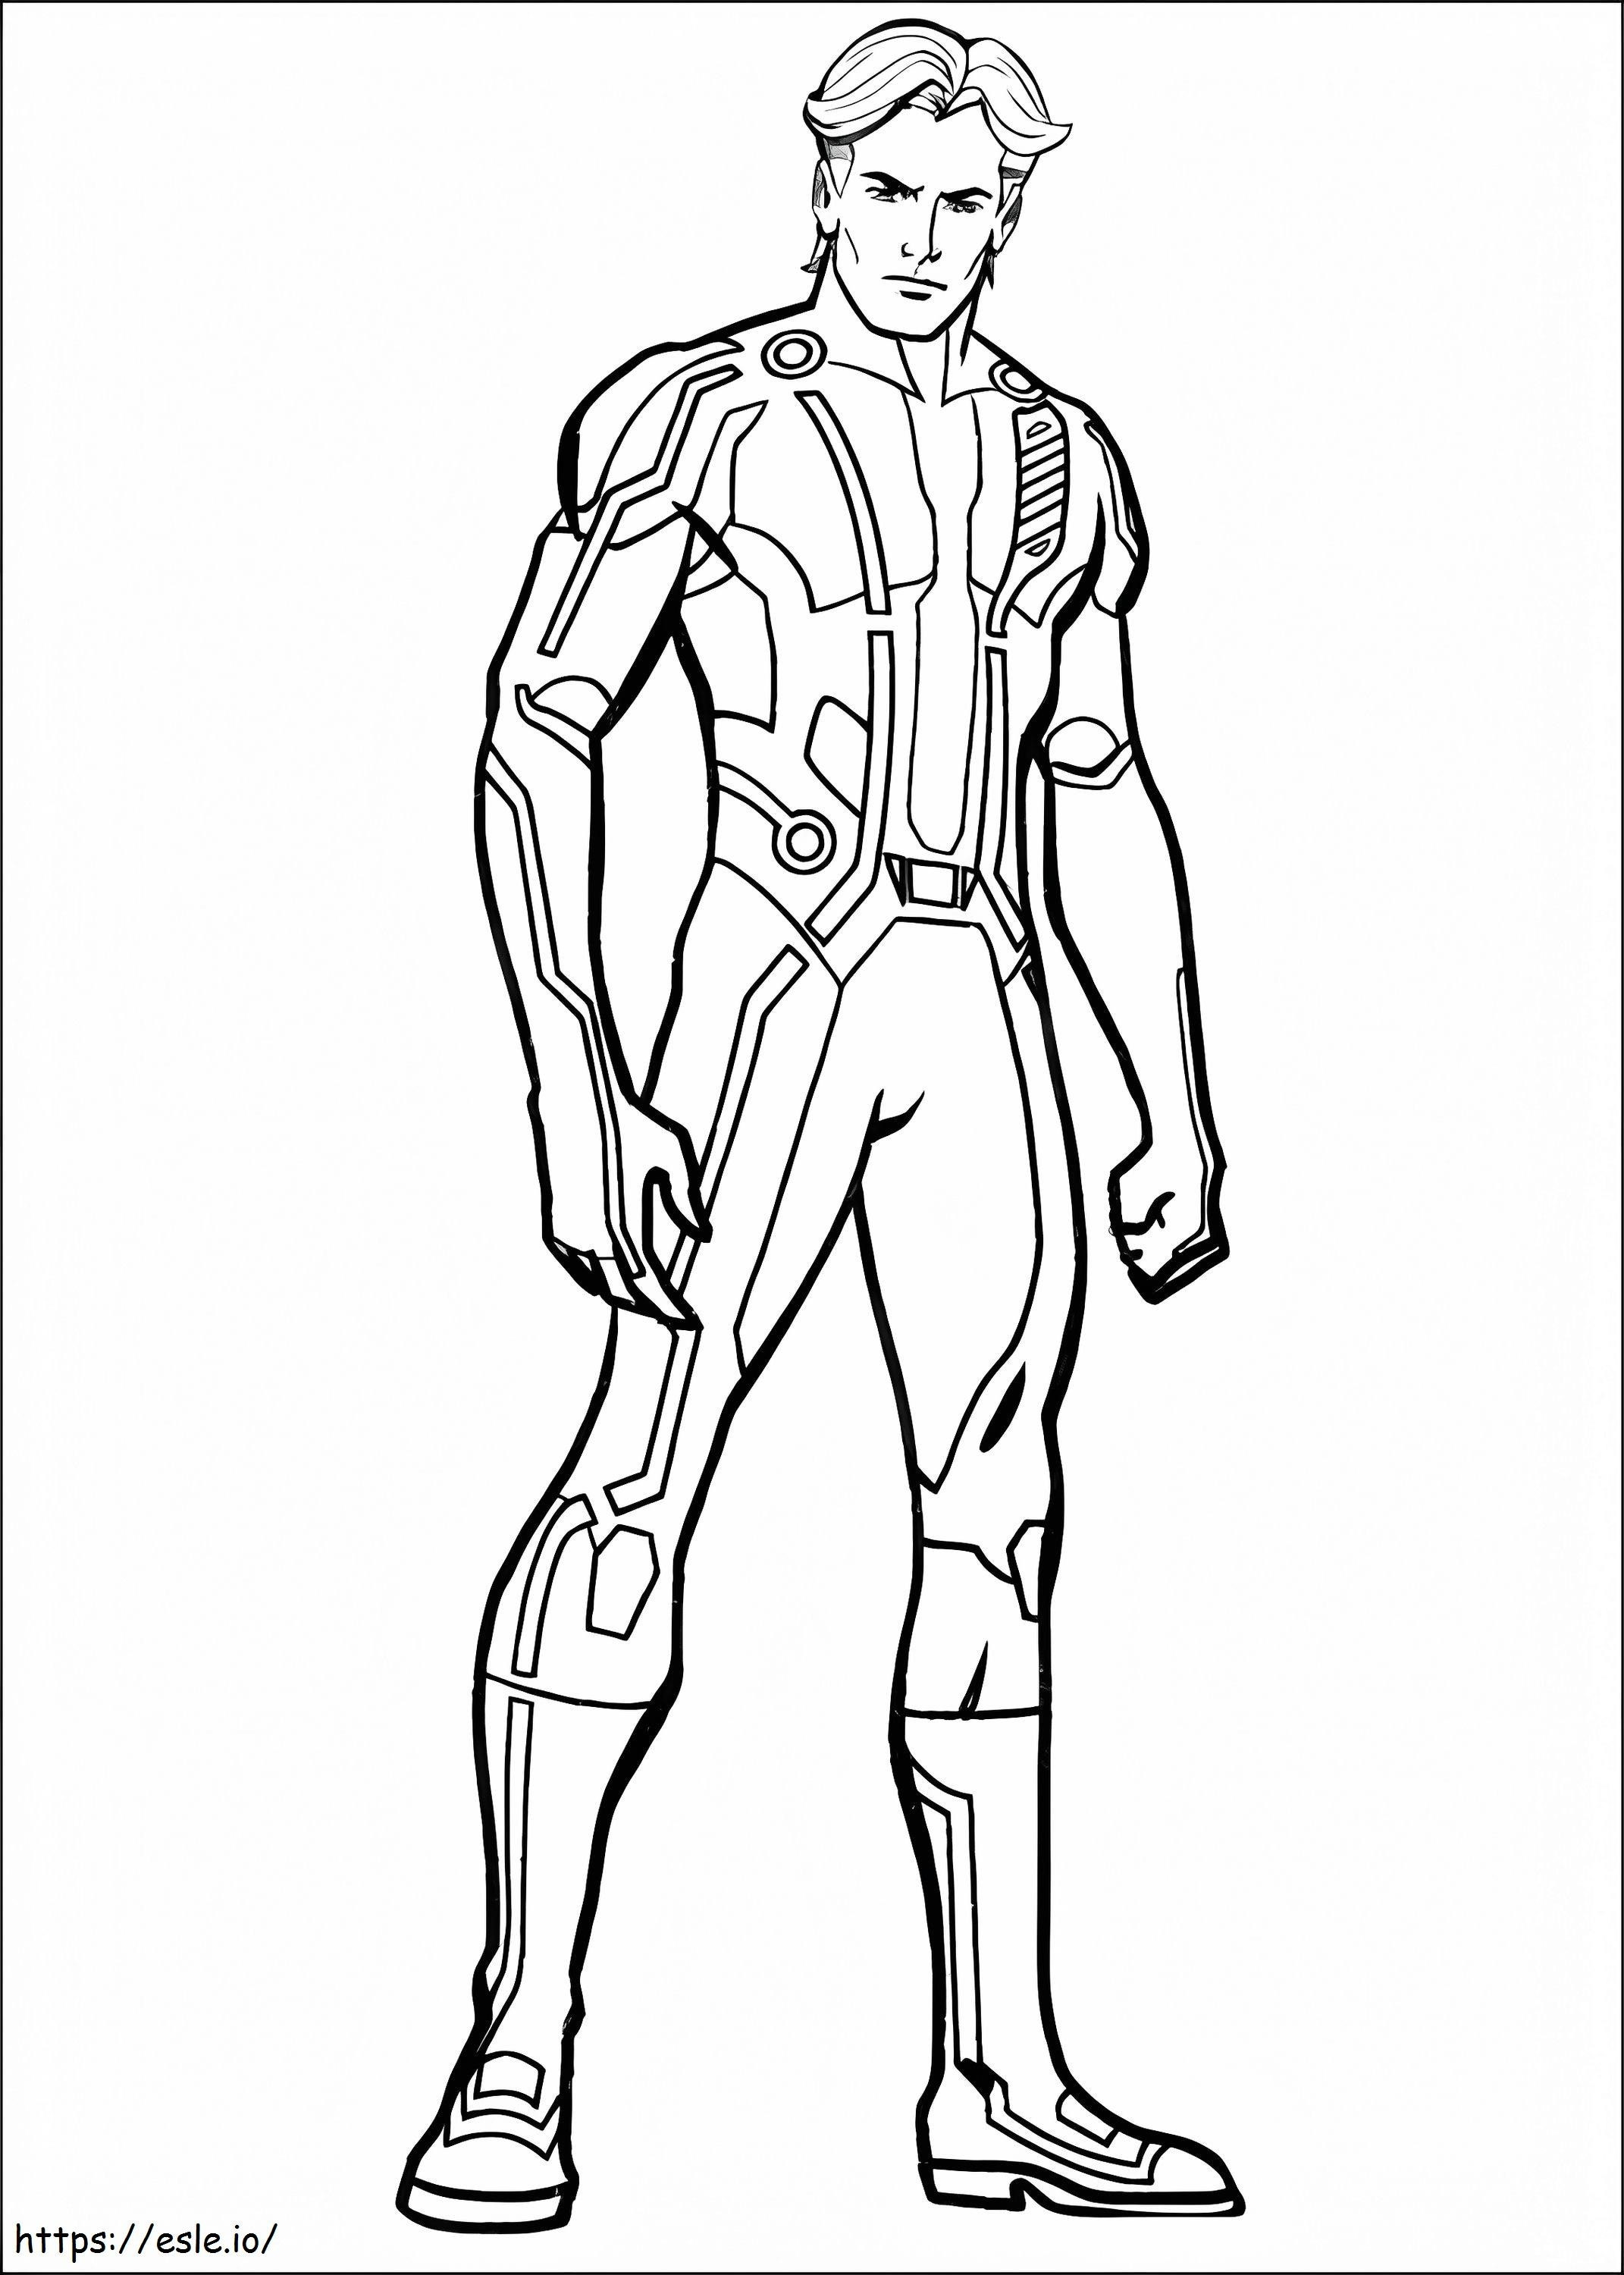 Handsome Tron coloring page